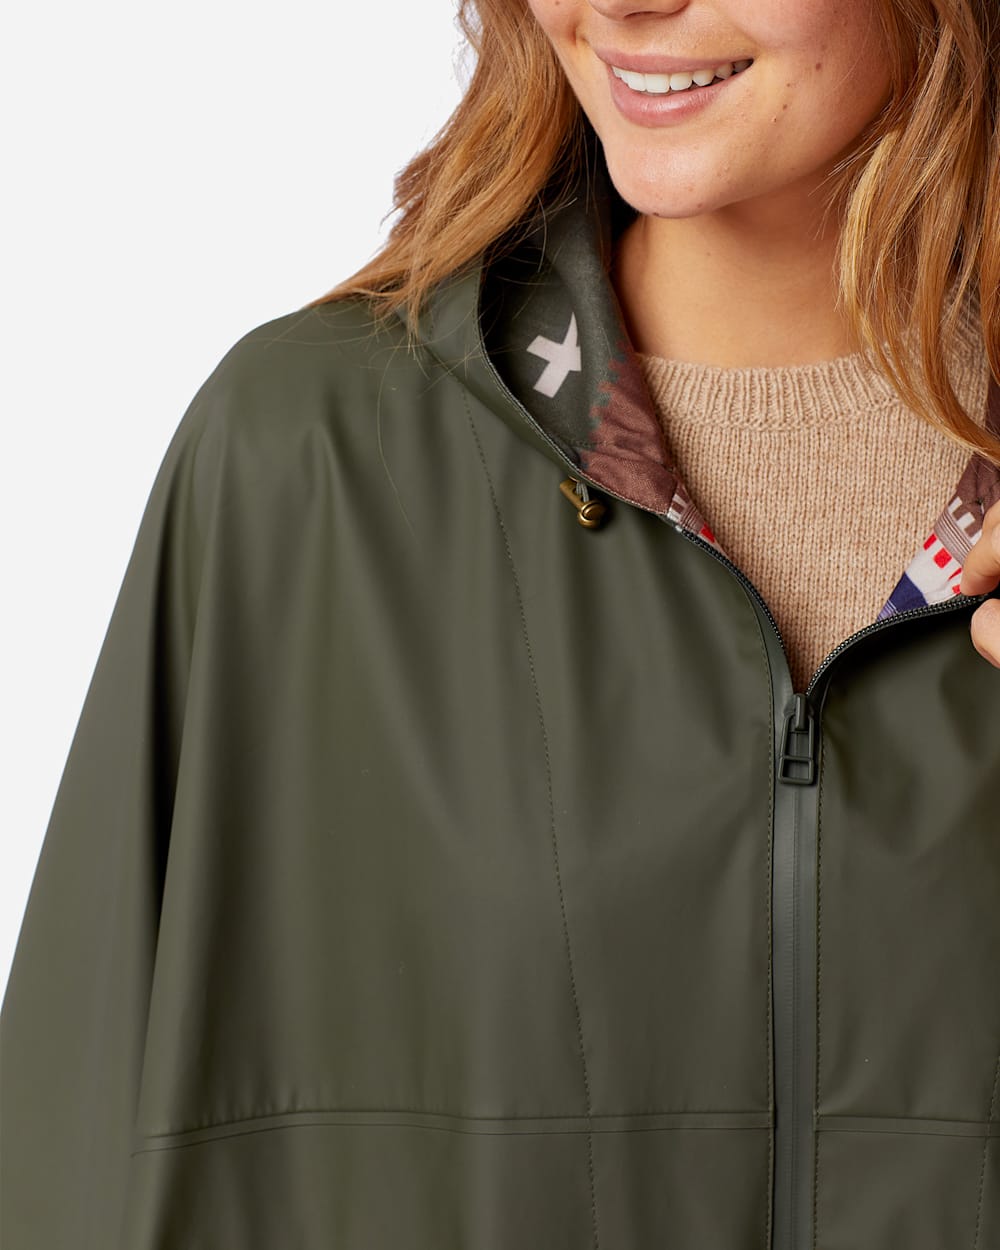 ALTERNATE VIEW OF WOMEN'S ZIP FRONT RAIN PONCHO IN OLIVE image number 2